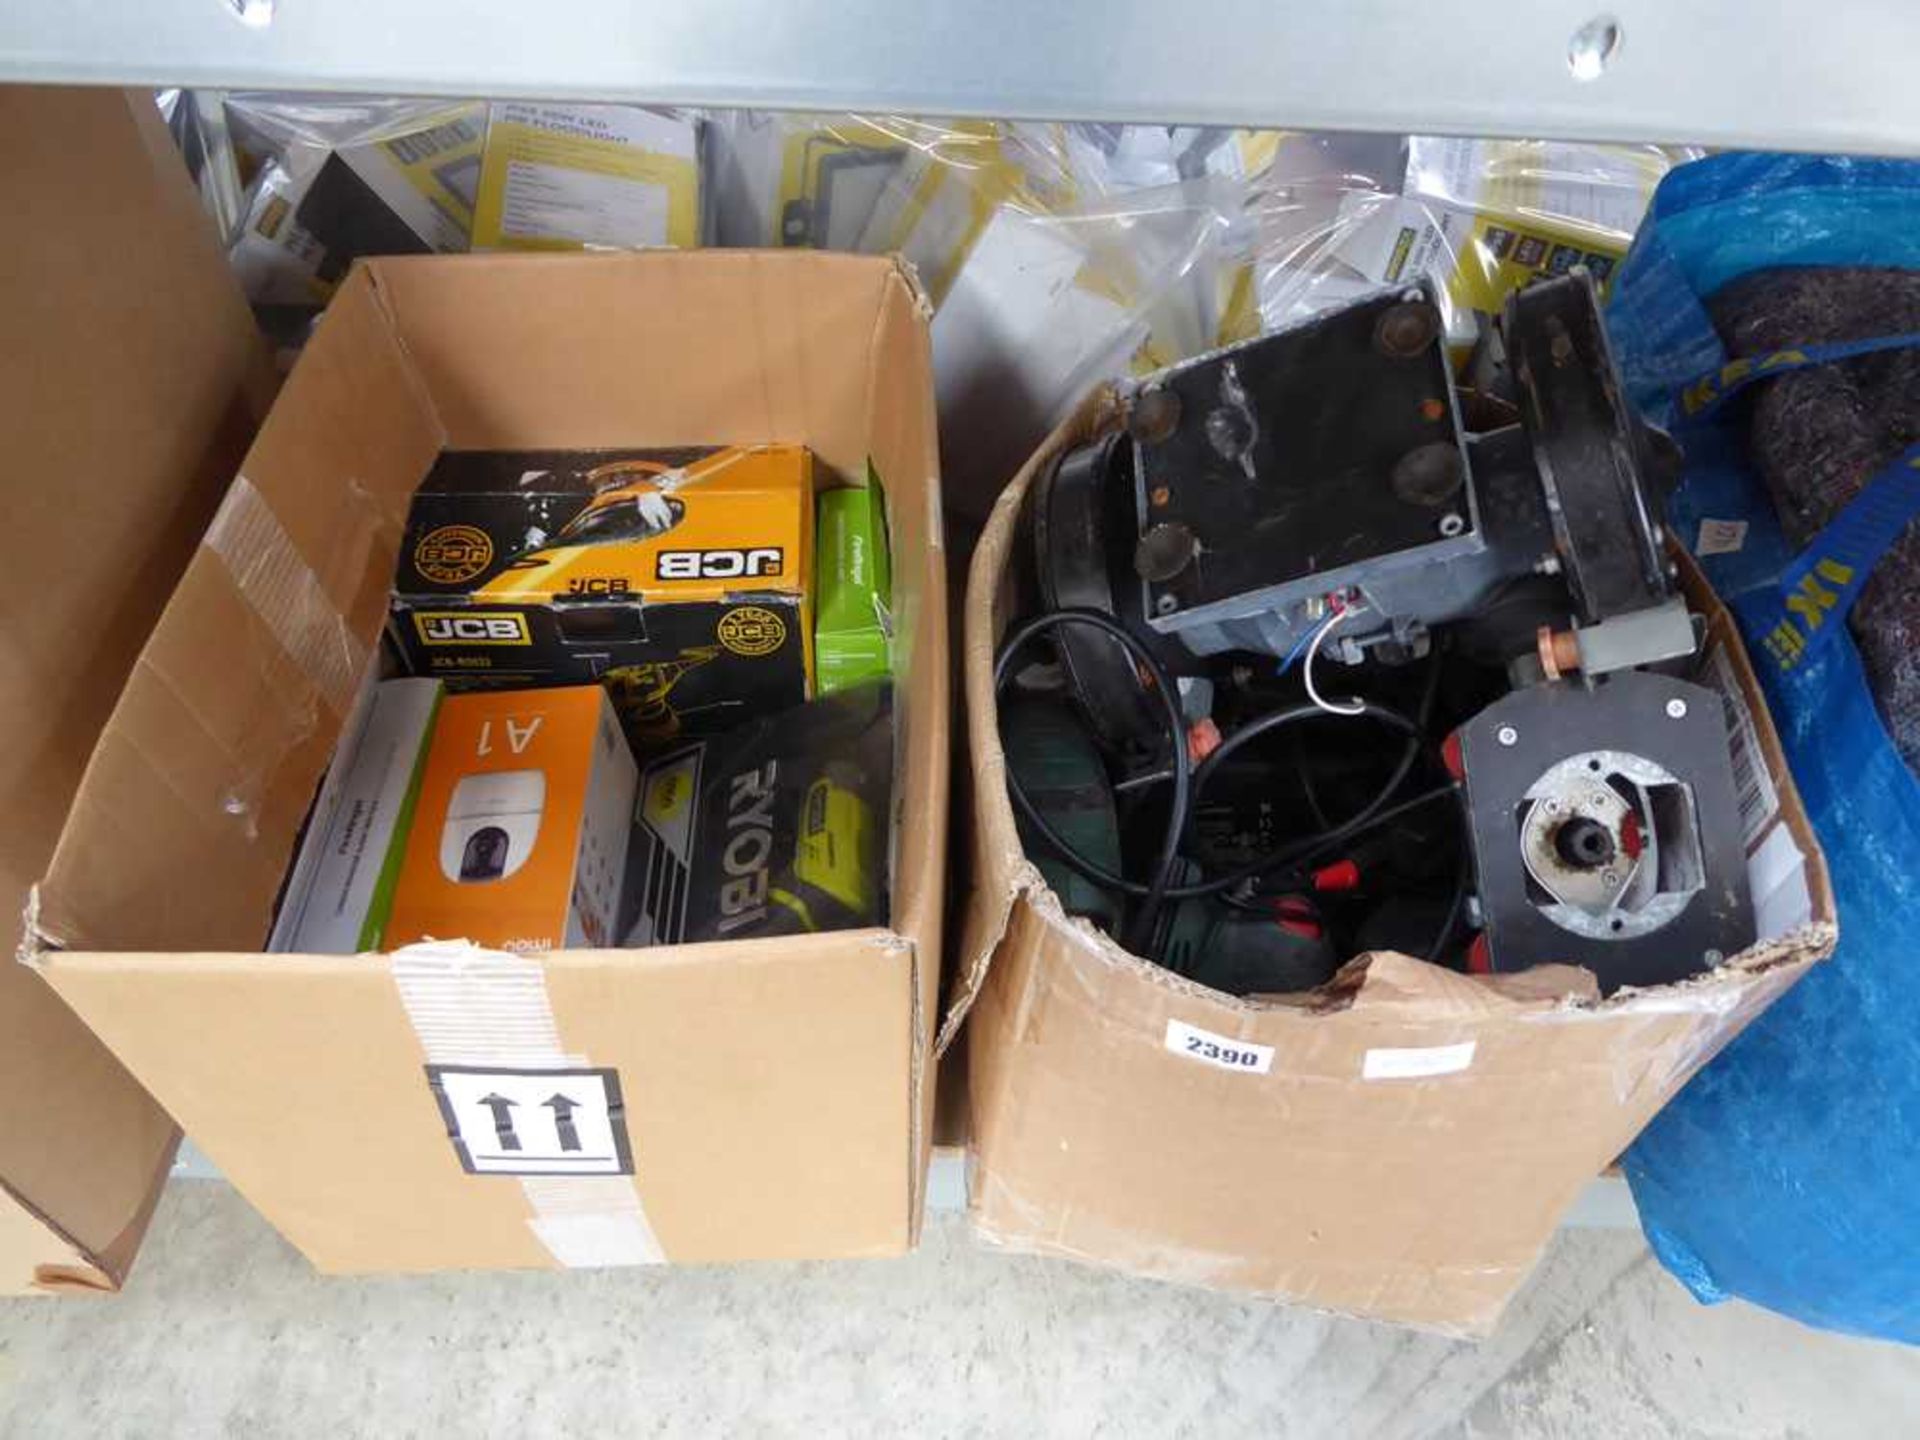 2 boxes containing mixed electric tooling and security cameras to include a bench grinder, jigsaw,